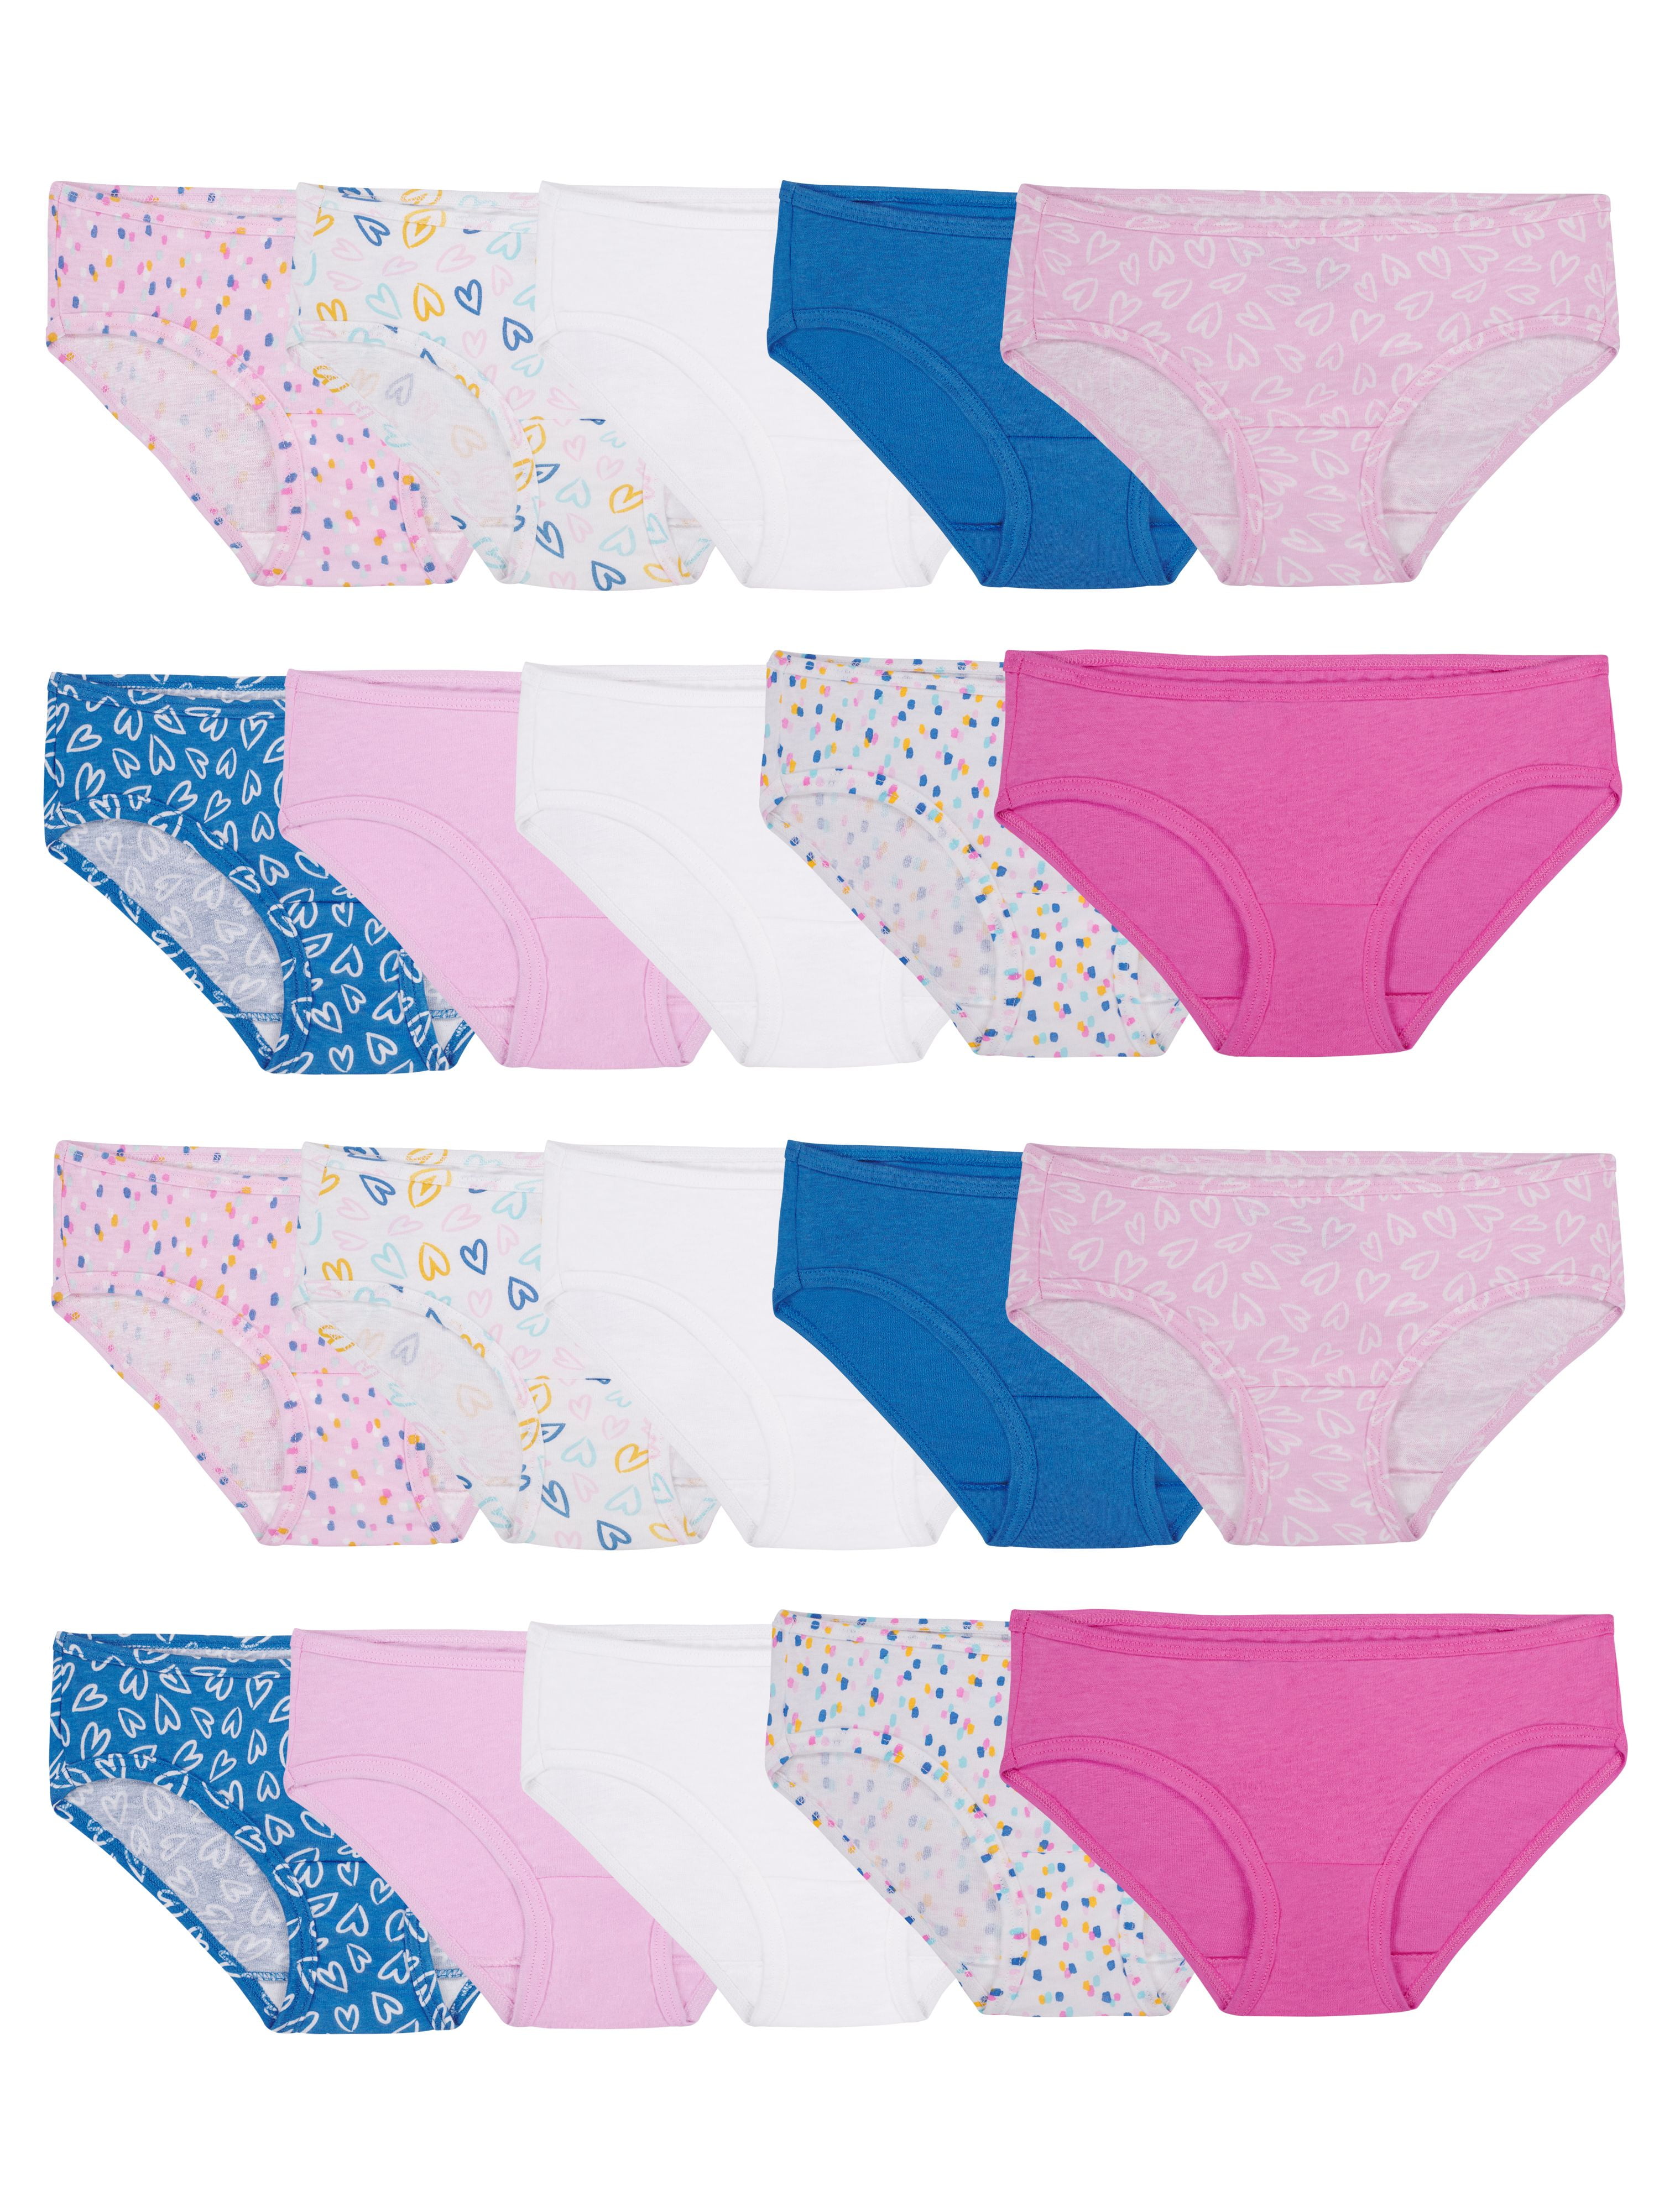 Fruit of the Loom Girls' Cotton Hipster Underwear 